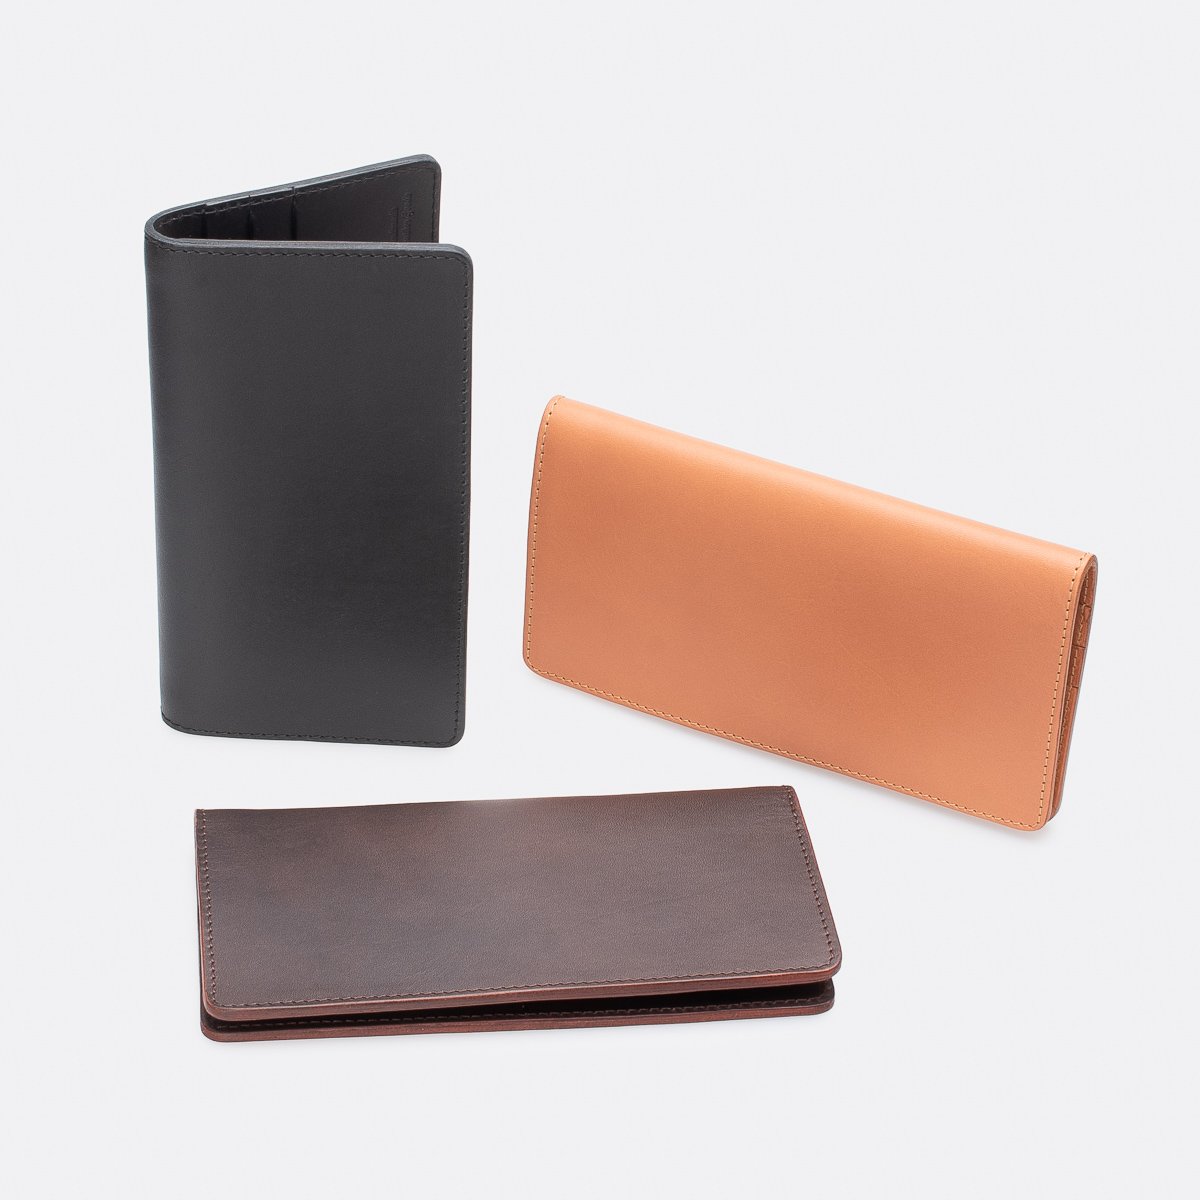 Trio Pouch Other Leathers - Men - Small Leather Goods